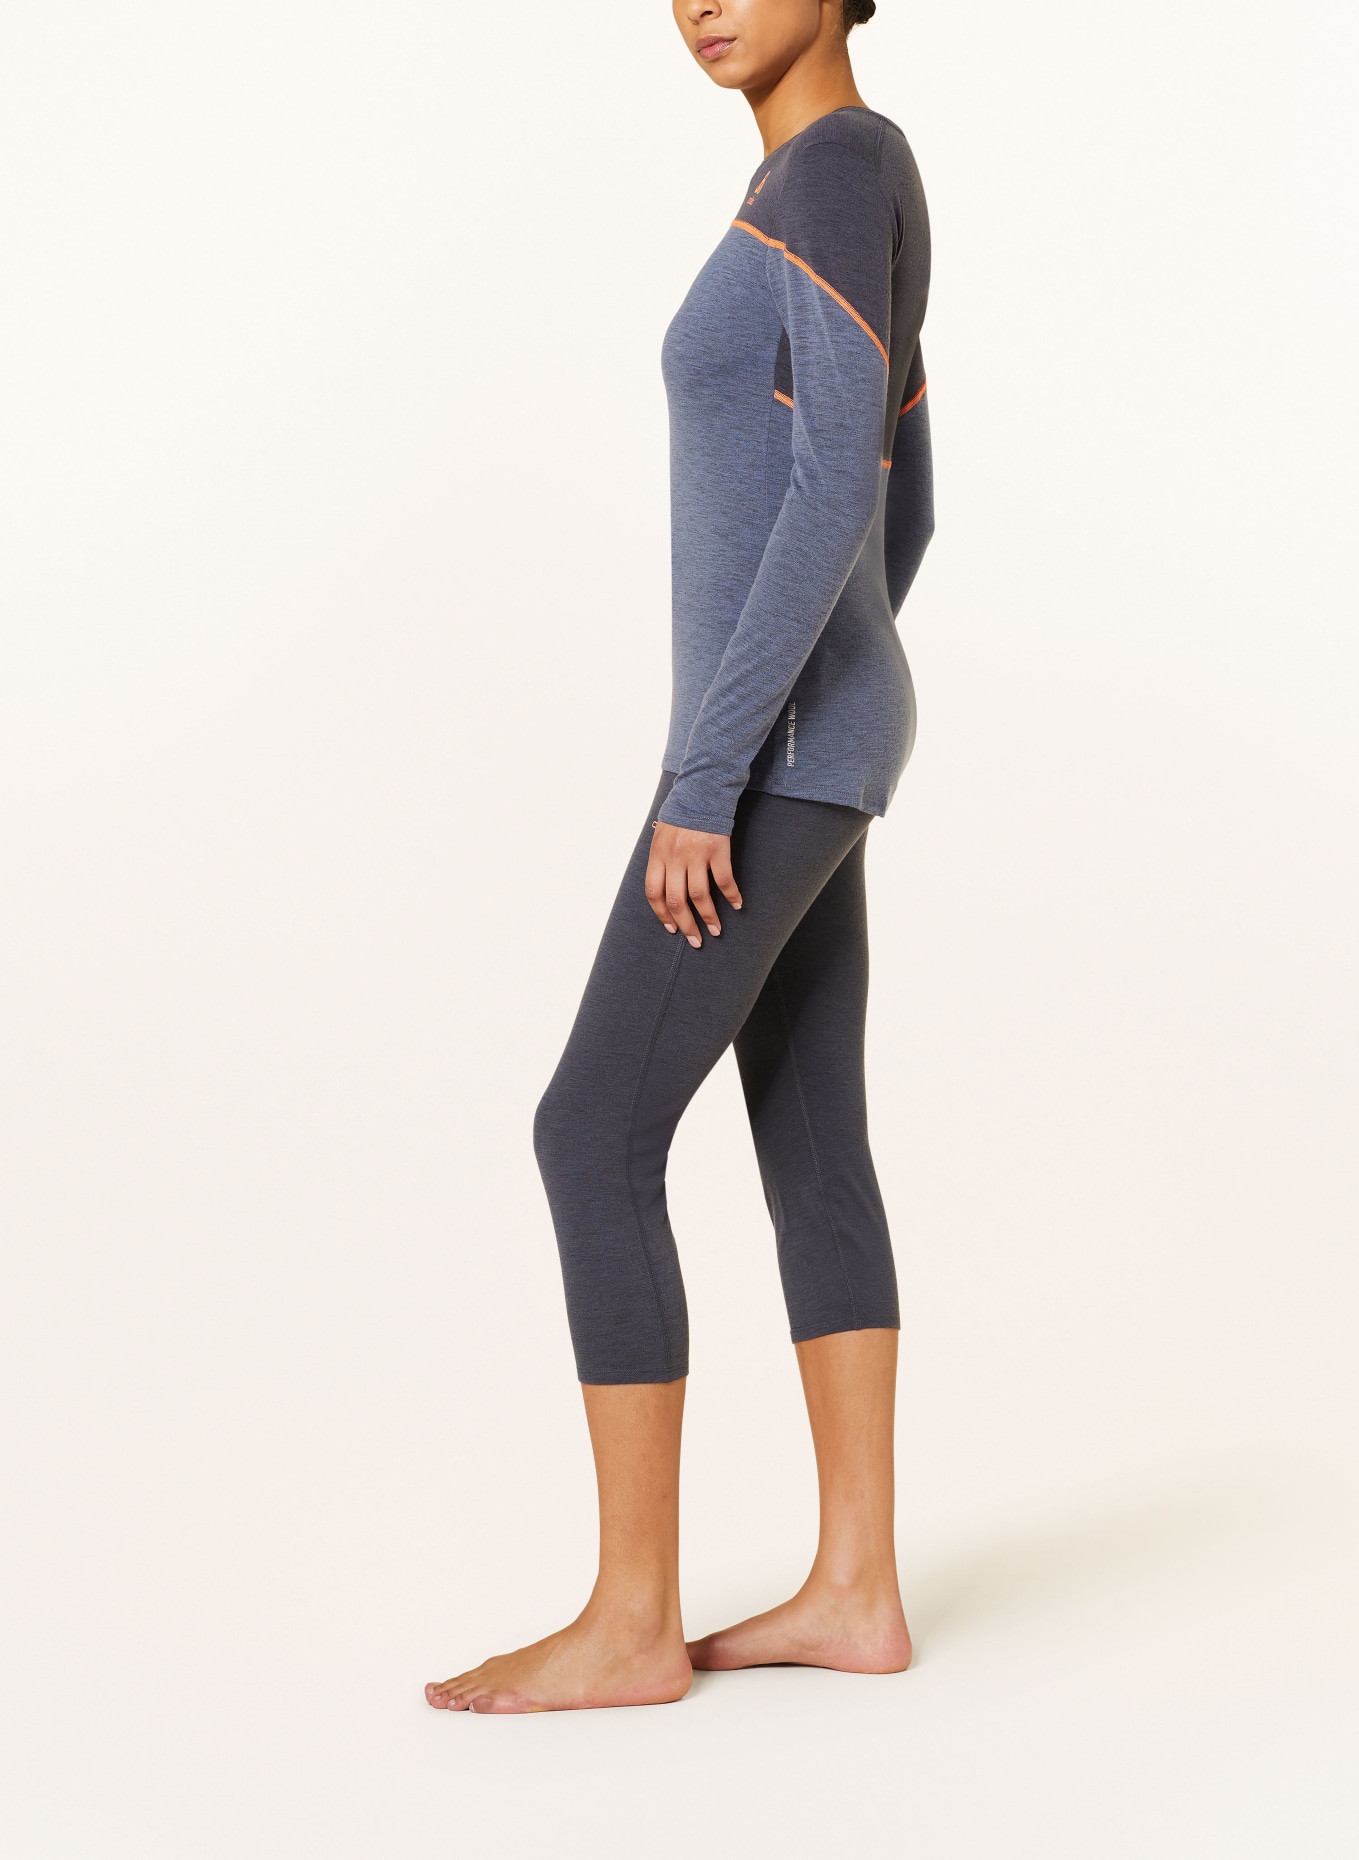 odlo Functional baselayer trousers REVELSTOKE PERFORMANCE with cropped leg length, Color: DARK GRAY (Image 4)